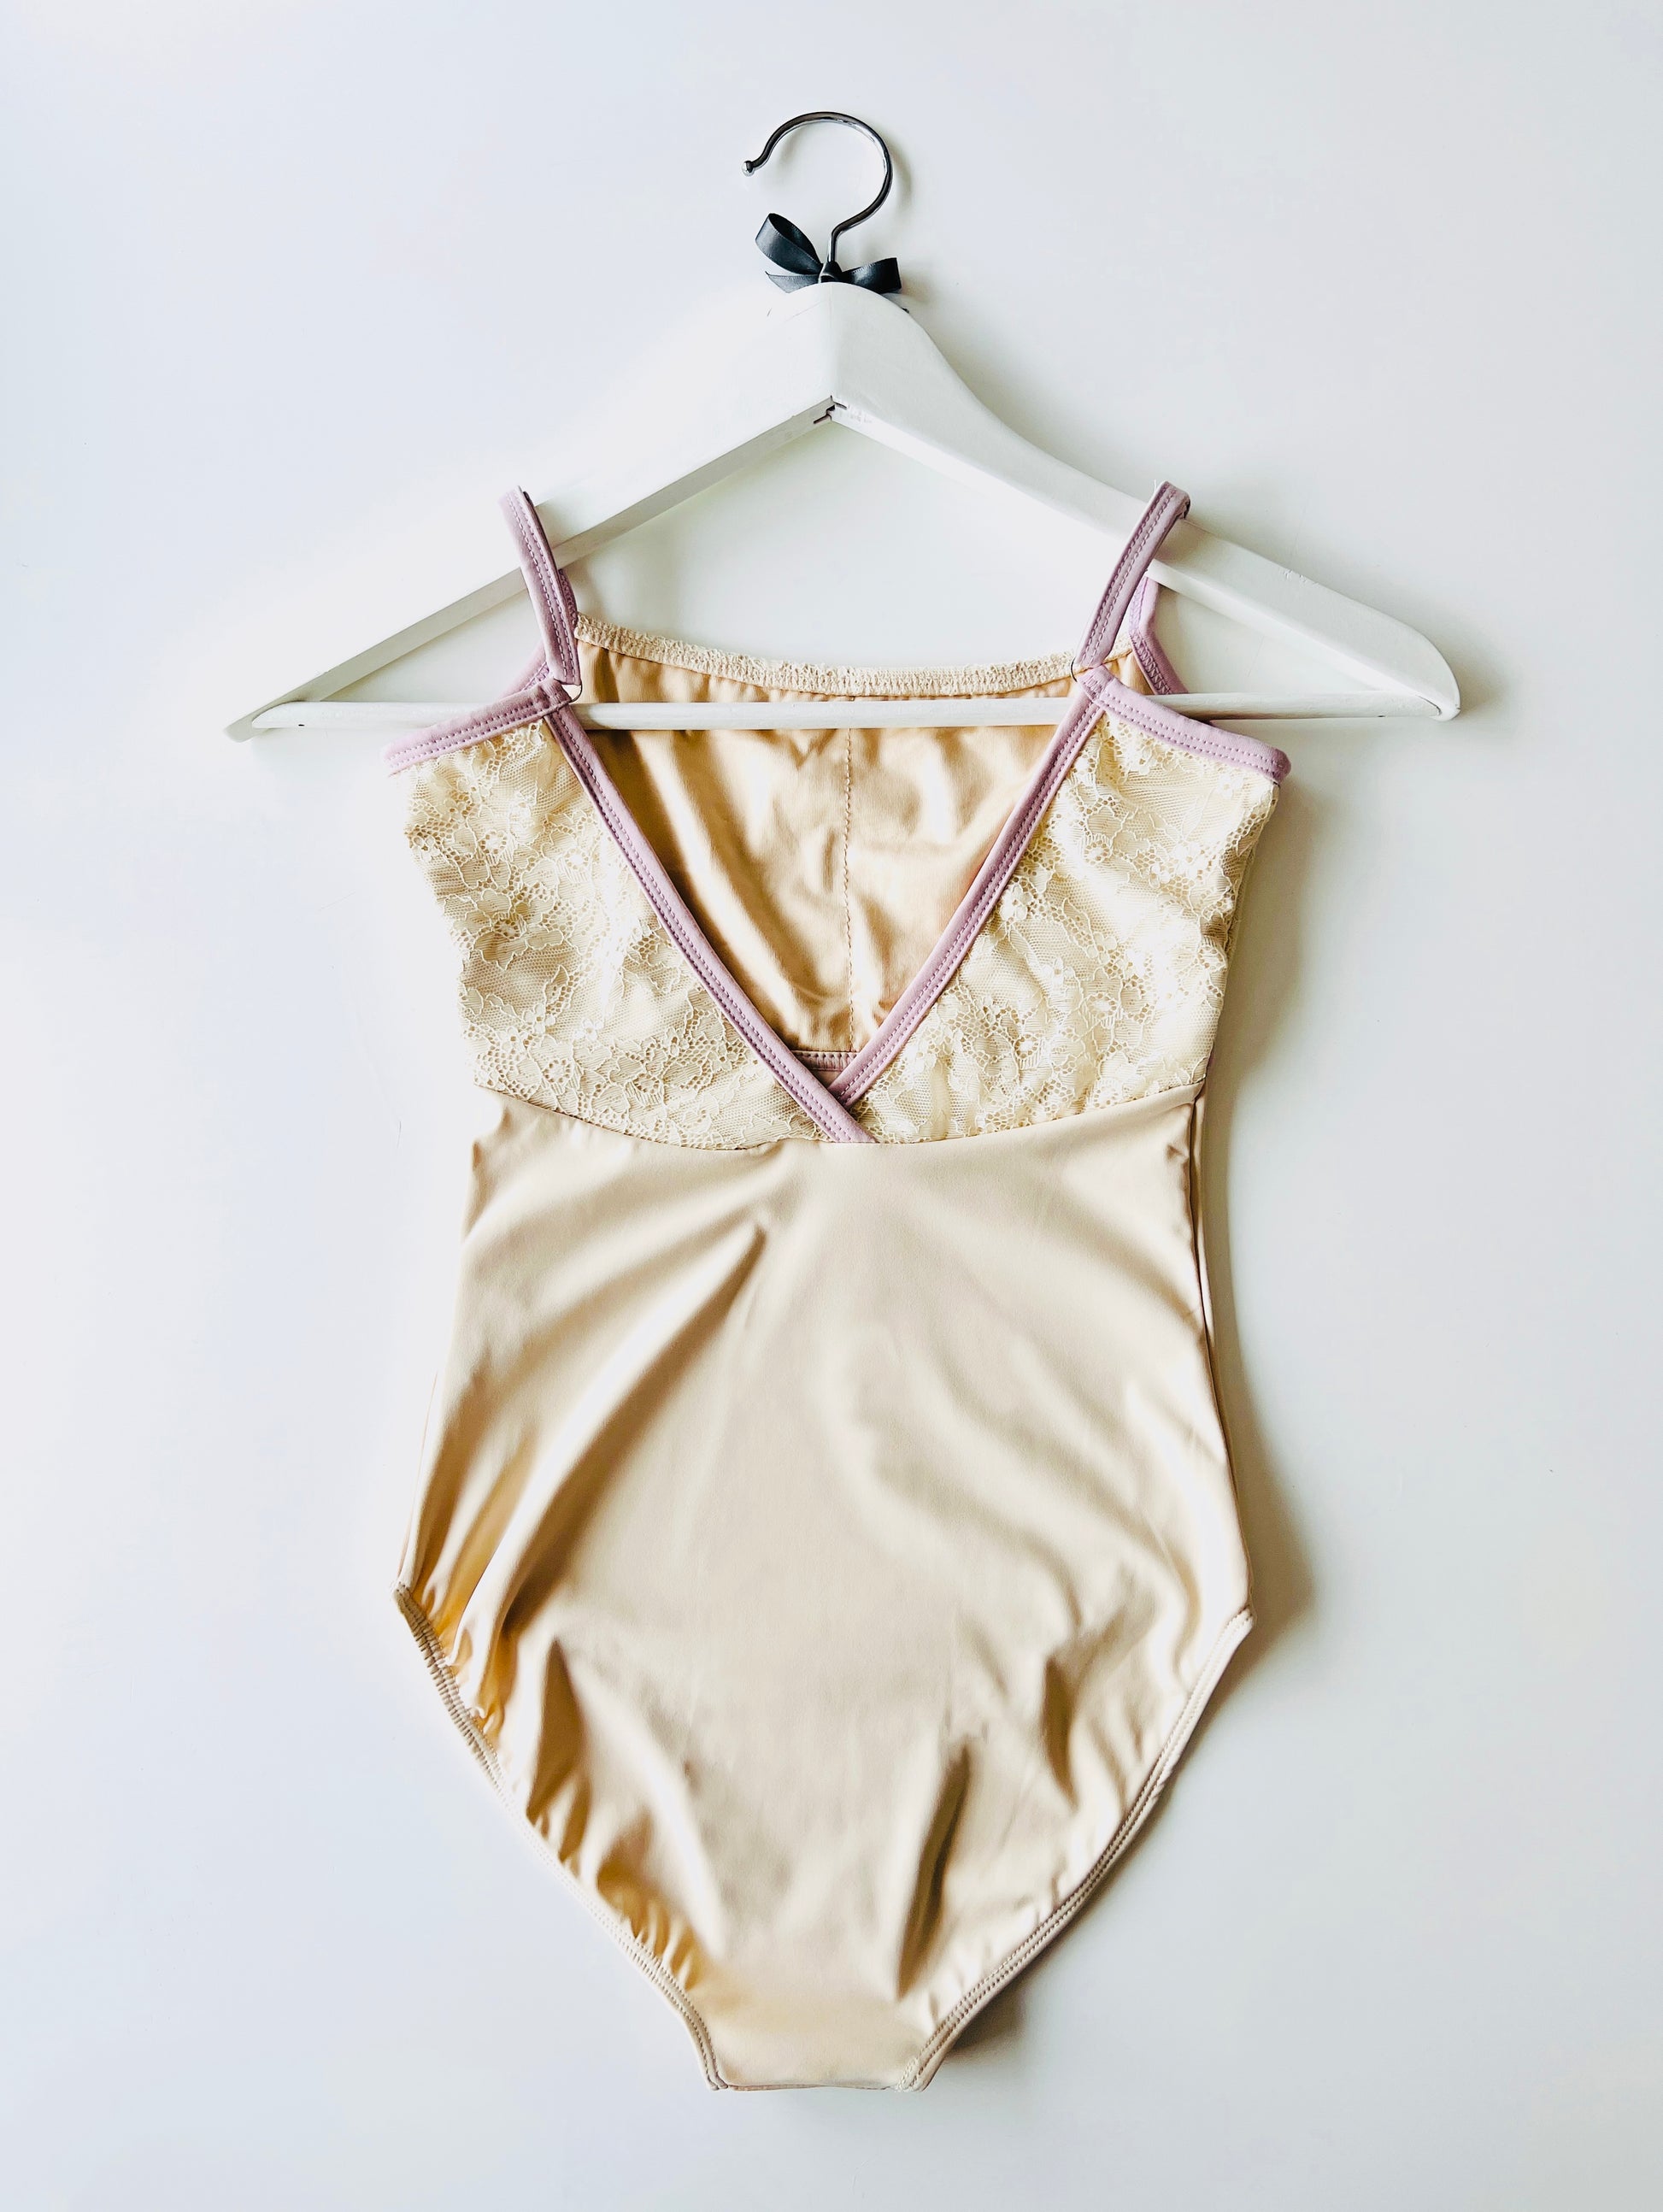 Lace top ballet leotard in cream and contrasting lilac from The Collective Dancewear